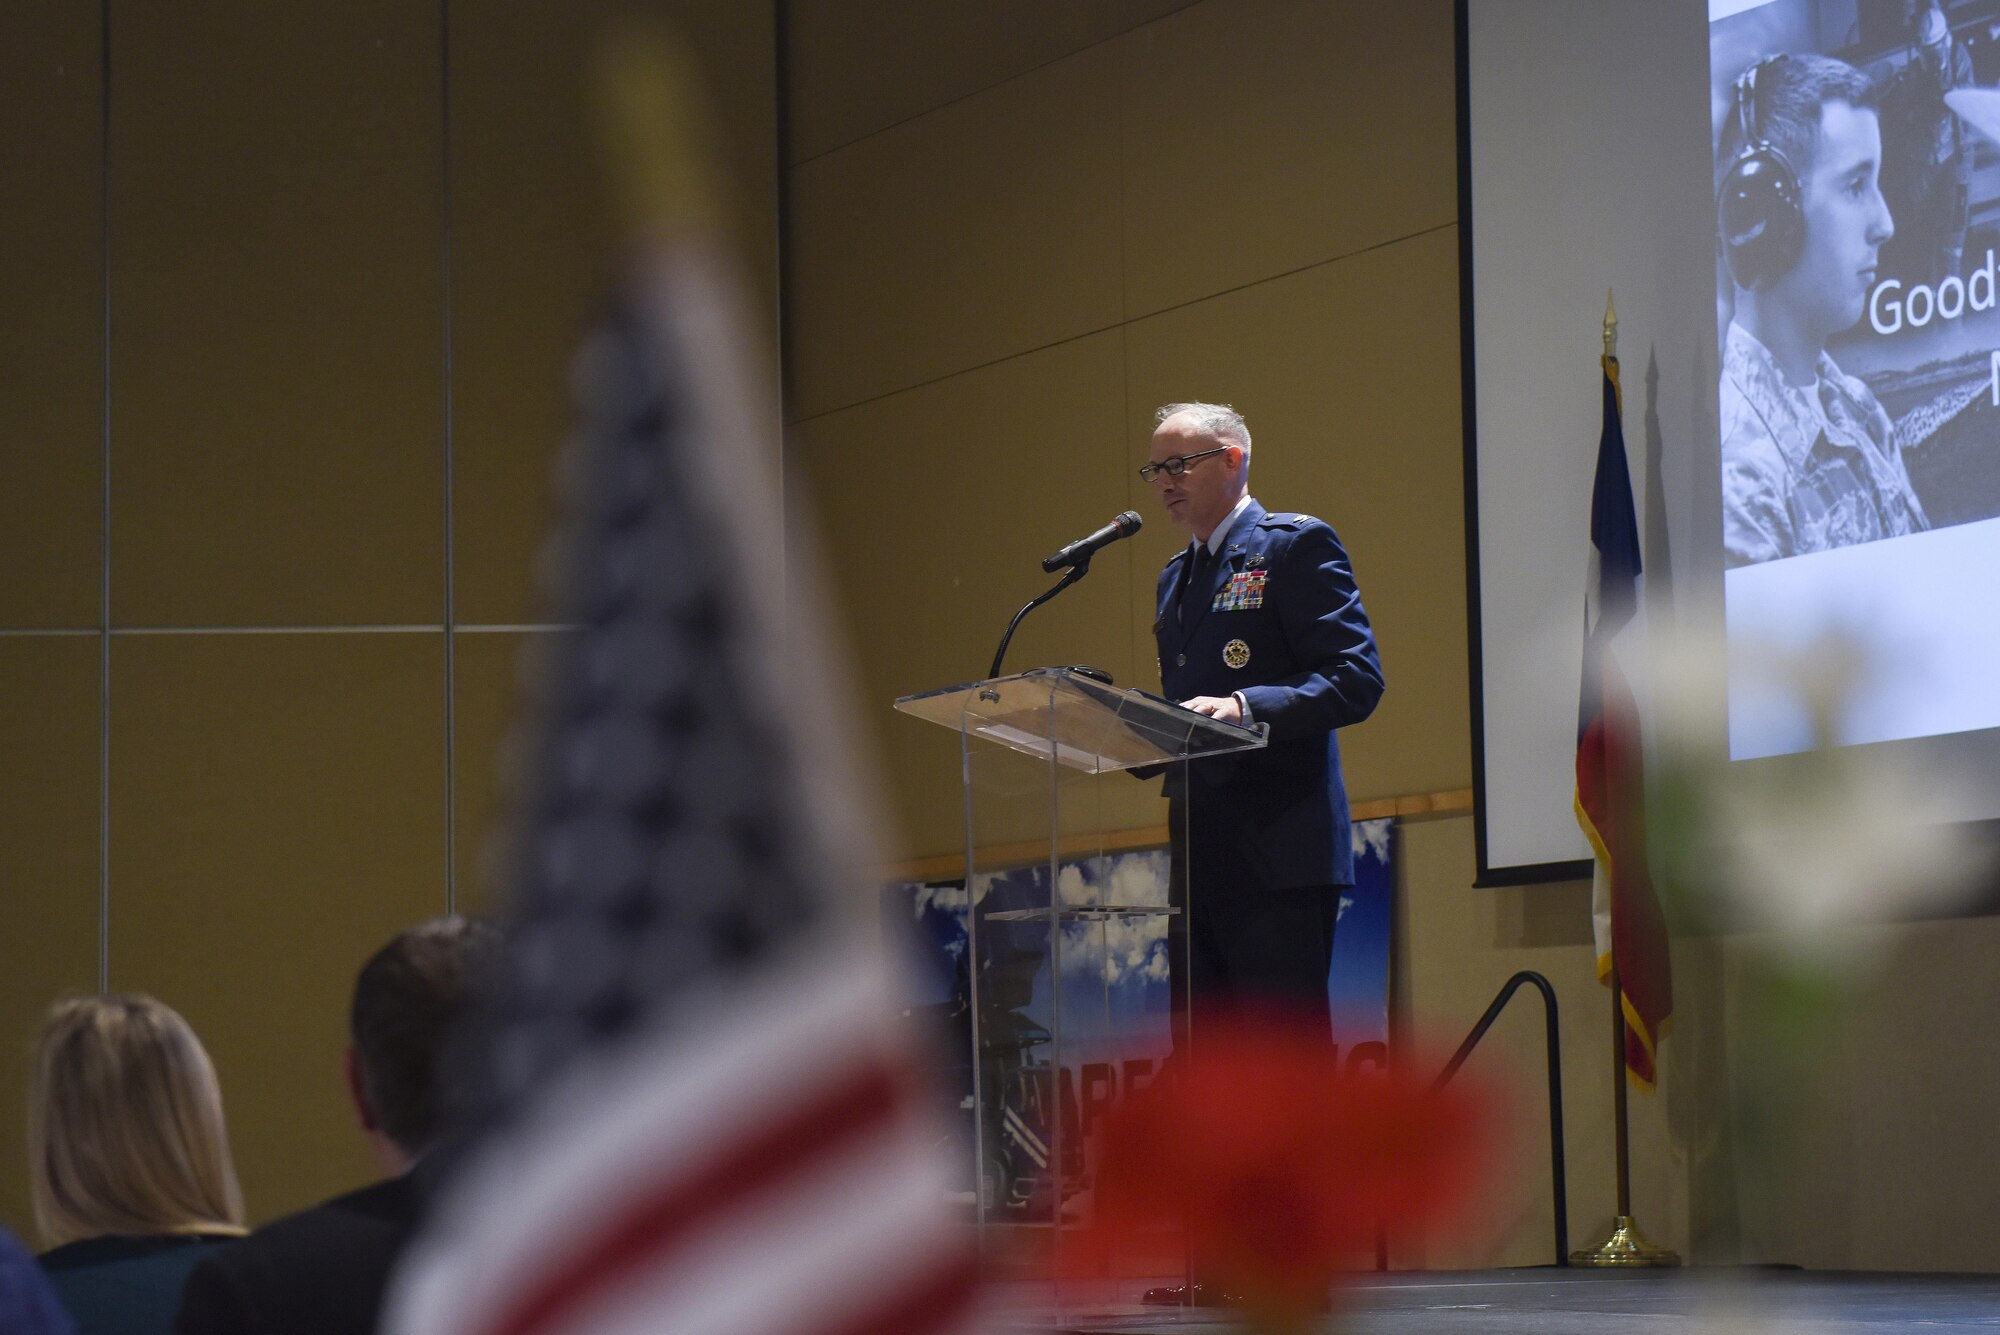 U.S. Air Force Col. Michael Downs, 17th Training Wing Commander, speaks at the annual Chamber of Commerce luncheon at the McNease Convention Center in San Angelo, Texas, March 21, 2017. Downs recognized outstanding Airmen from Goodfellow for their contributions to the Air Force and the San Angelo community. (U.S. Air Force photo by Airman 1st Class Chase Sousa/Released)